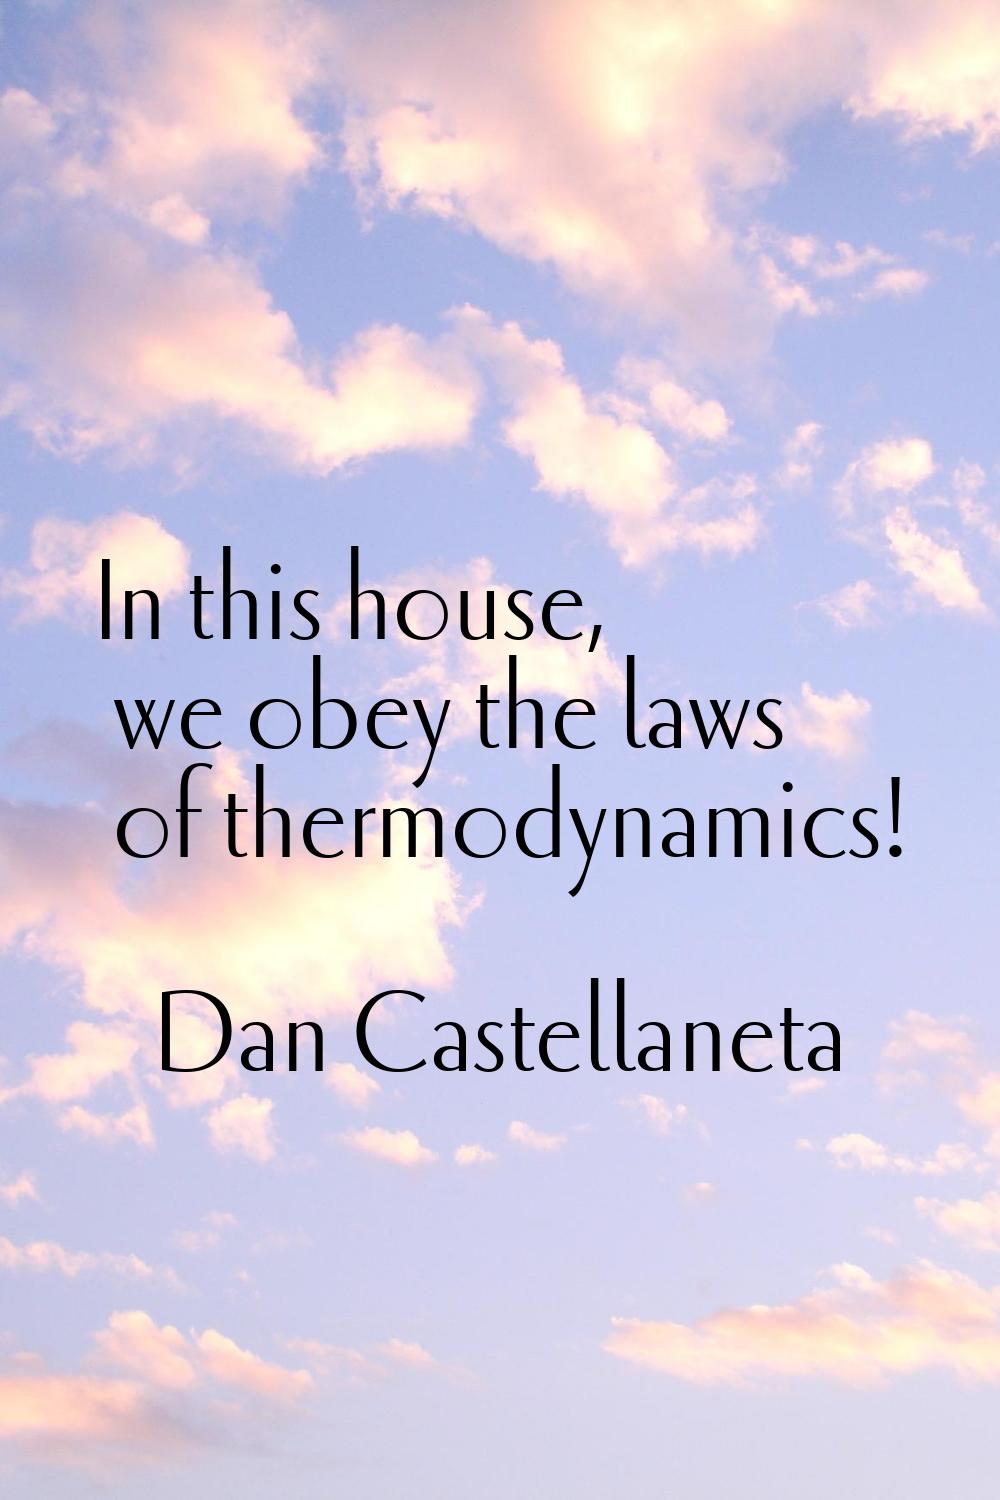 In this house, we obey the laws of thermodynamics!